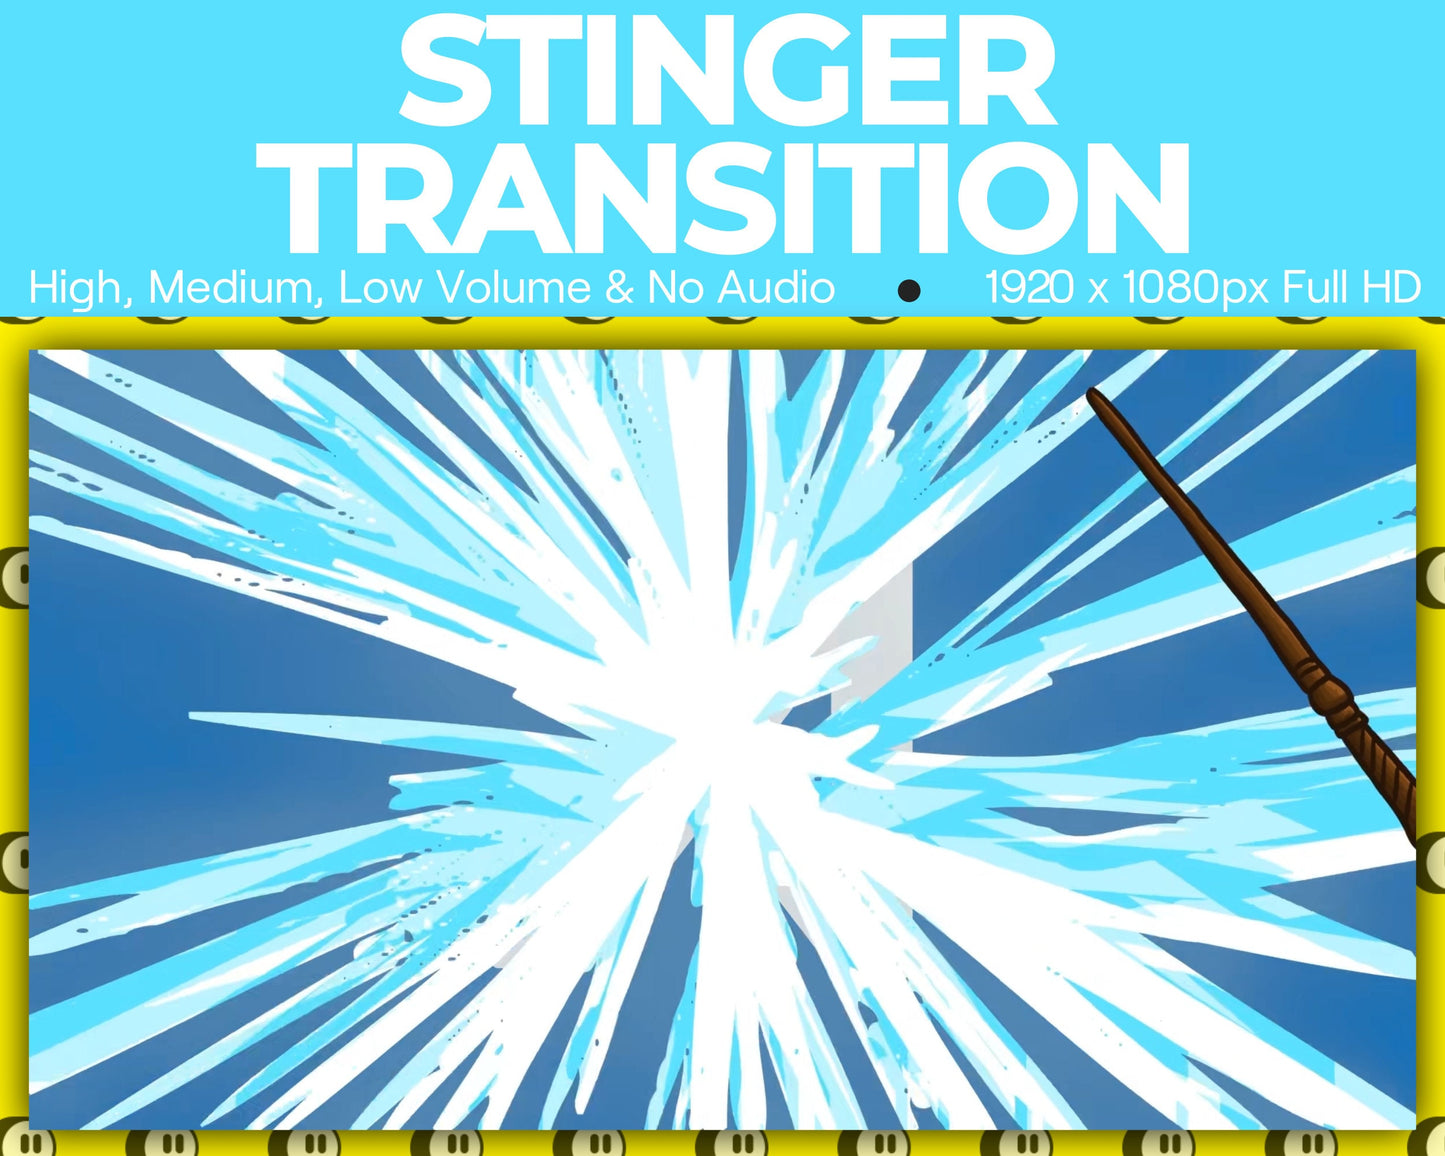 Ice Magic Wand Stinger Transition, Magical Cute Animated Twitch Overlays, Glacier Frozen YouTube Facebook and Kick Transitions for Streamers